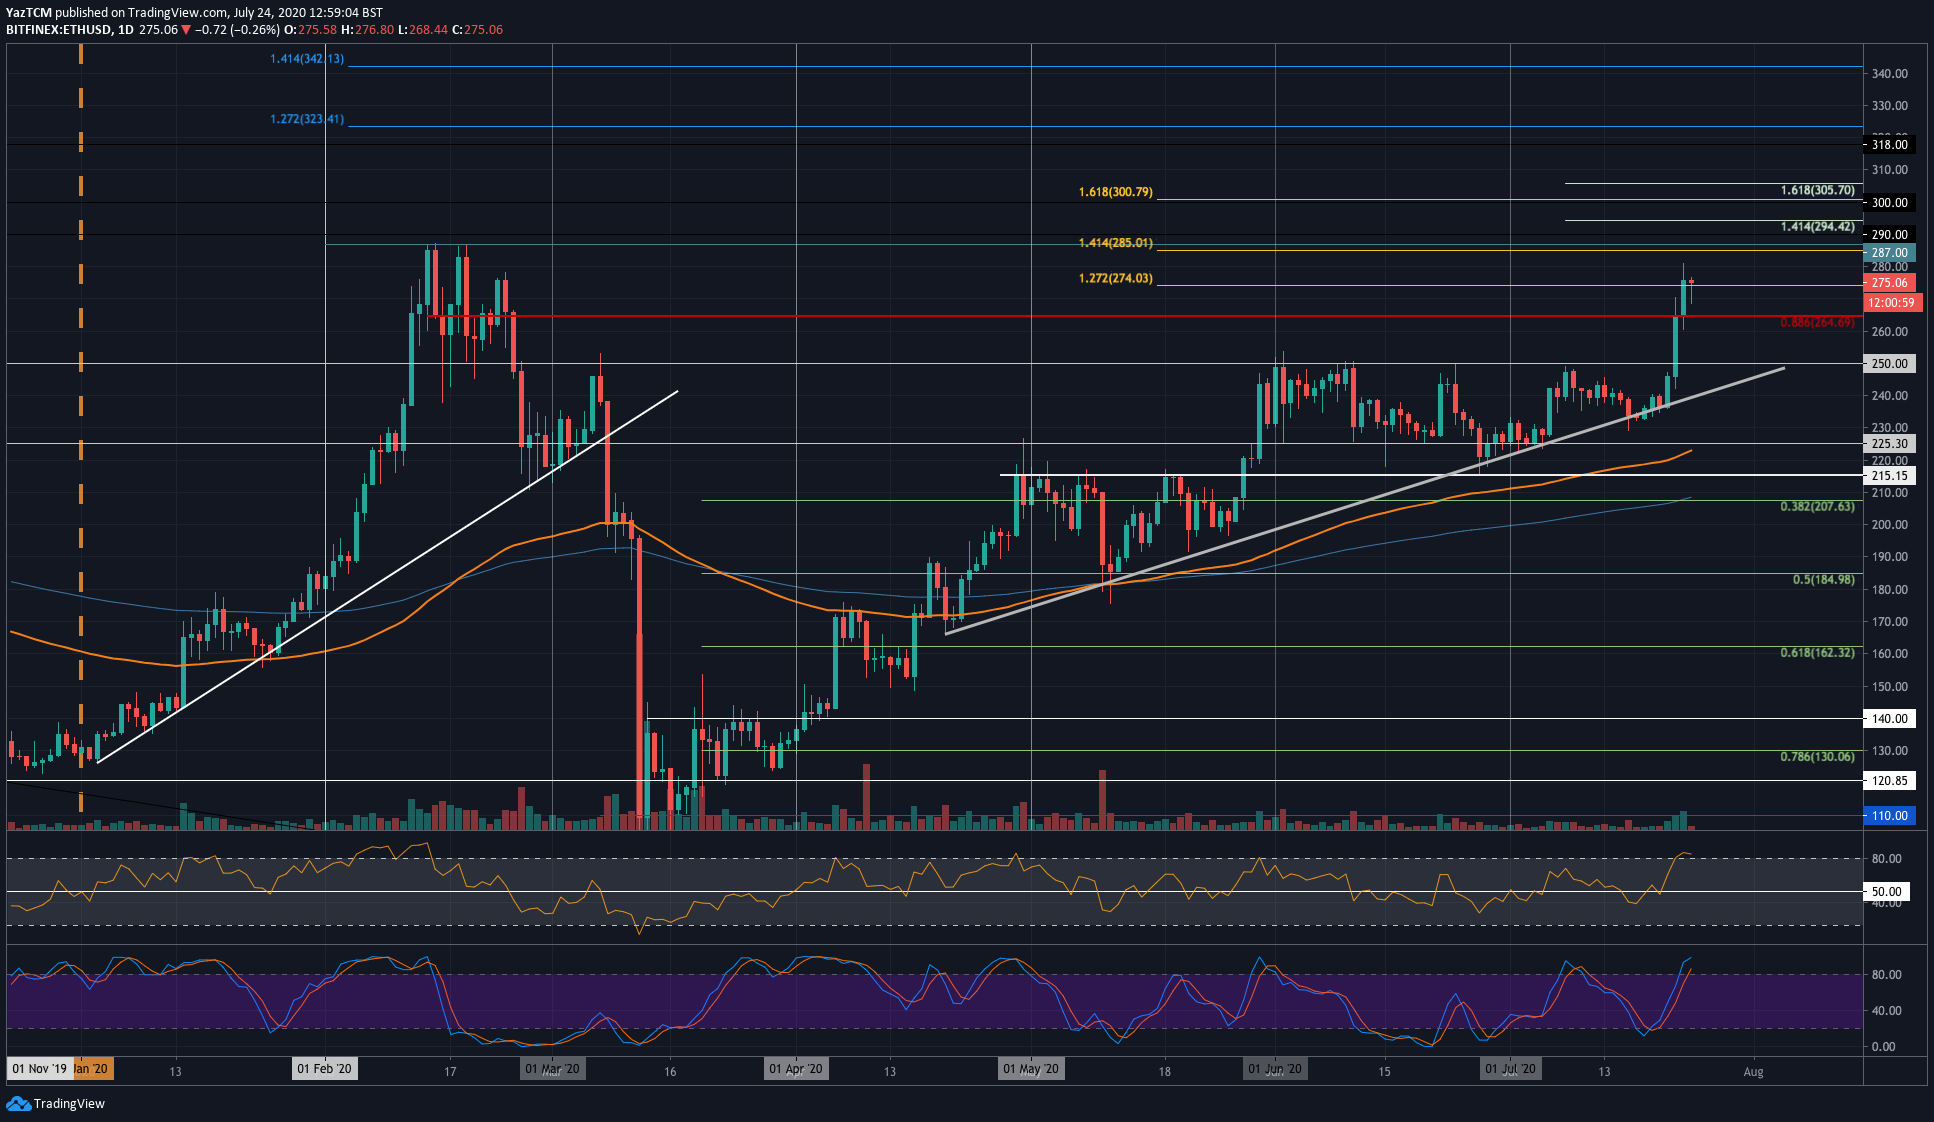 Crypto Price Analysis & Overview July 24th: Bitcoin, Ethereum, Ripple, DigiByte, and Augur